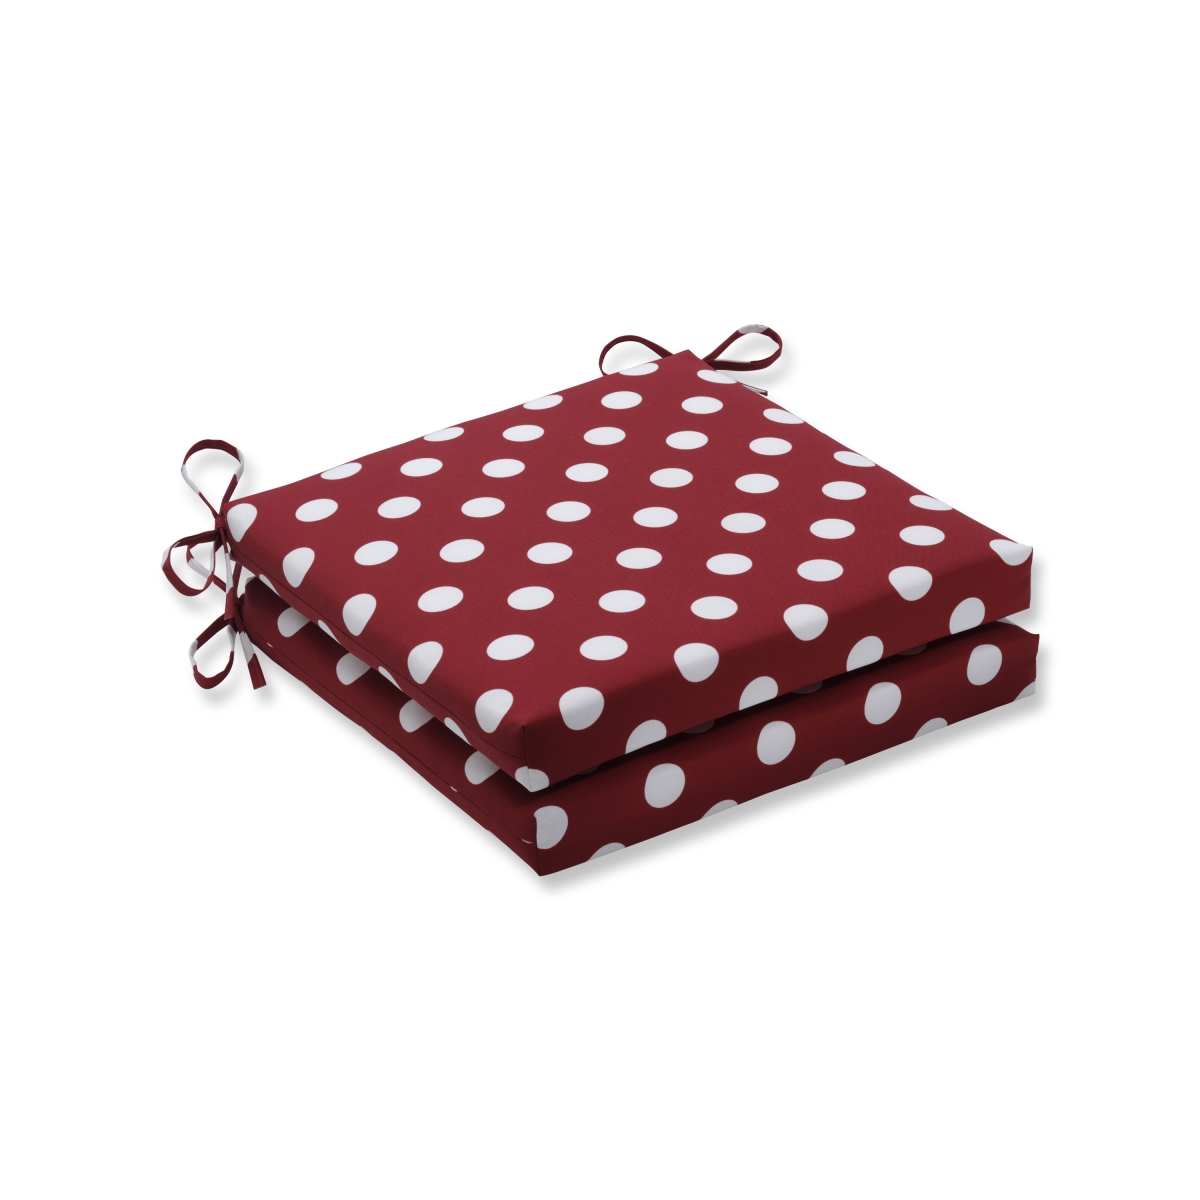 20 X 20 X 3 In. Outdoor & Indoor Polka Dot Squared Corners Seat Cushion, Red - Set Of 2